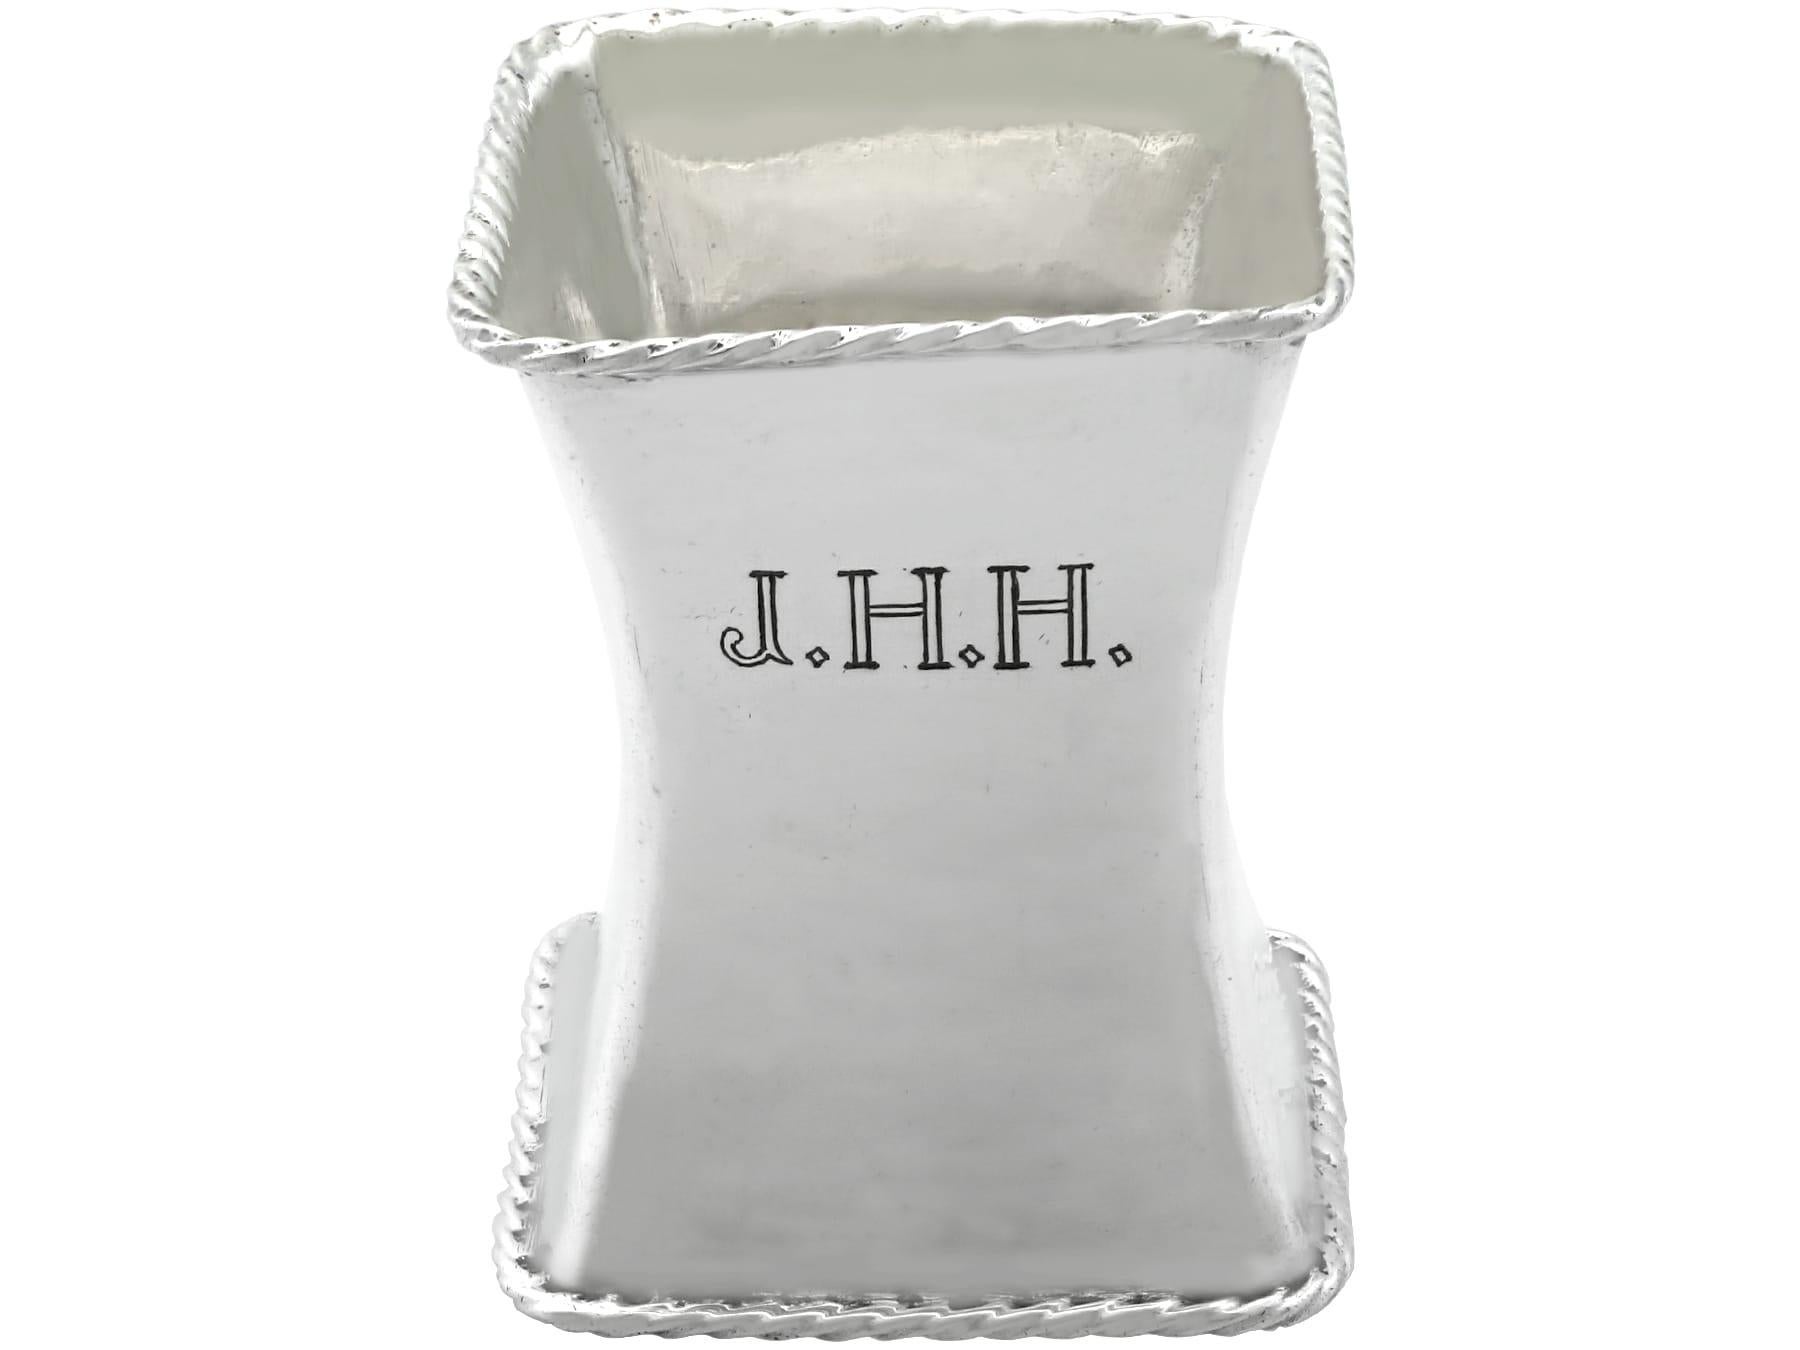 This exceptional antique George V sterling silver napkin ring has a square form with rounded corners.

The large and elongated waisted surface of this Omar Ramsden napkin ring is embellished with the contemporary engraved initials 'J.H.H'.

The